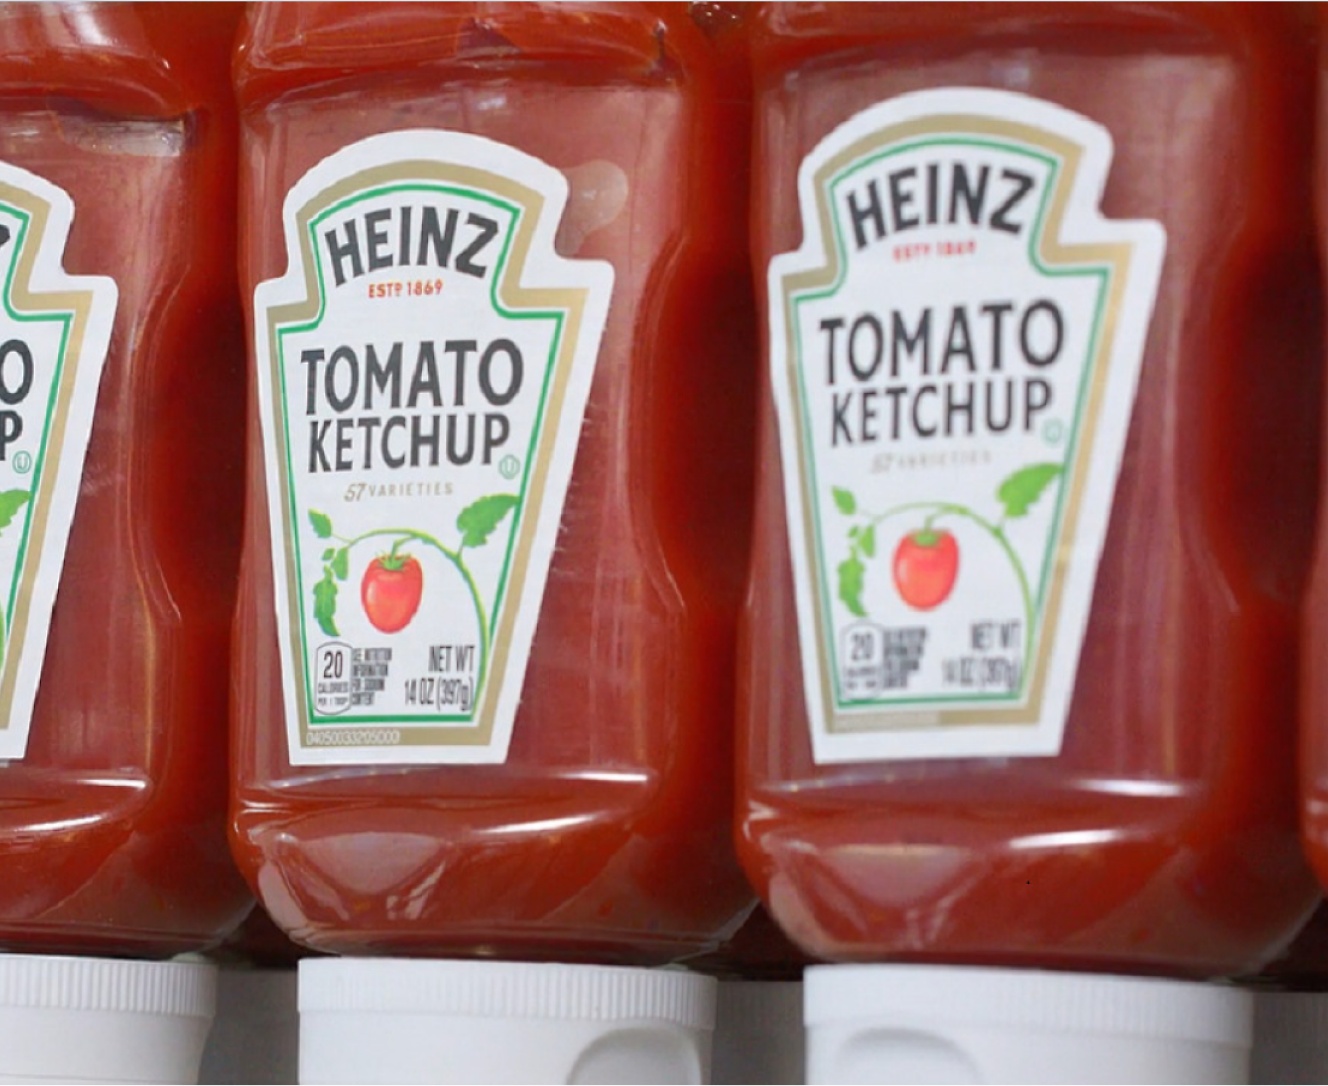 Multiple bottles of Heinz Tomato ketchup placed in shelf